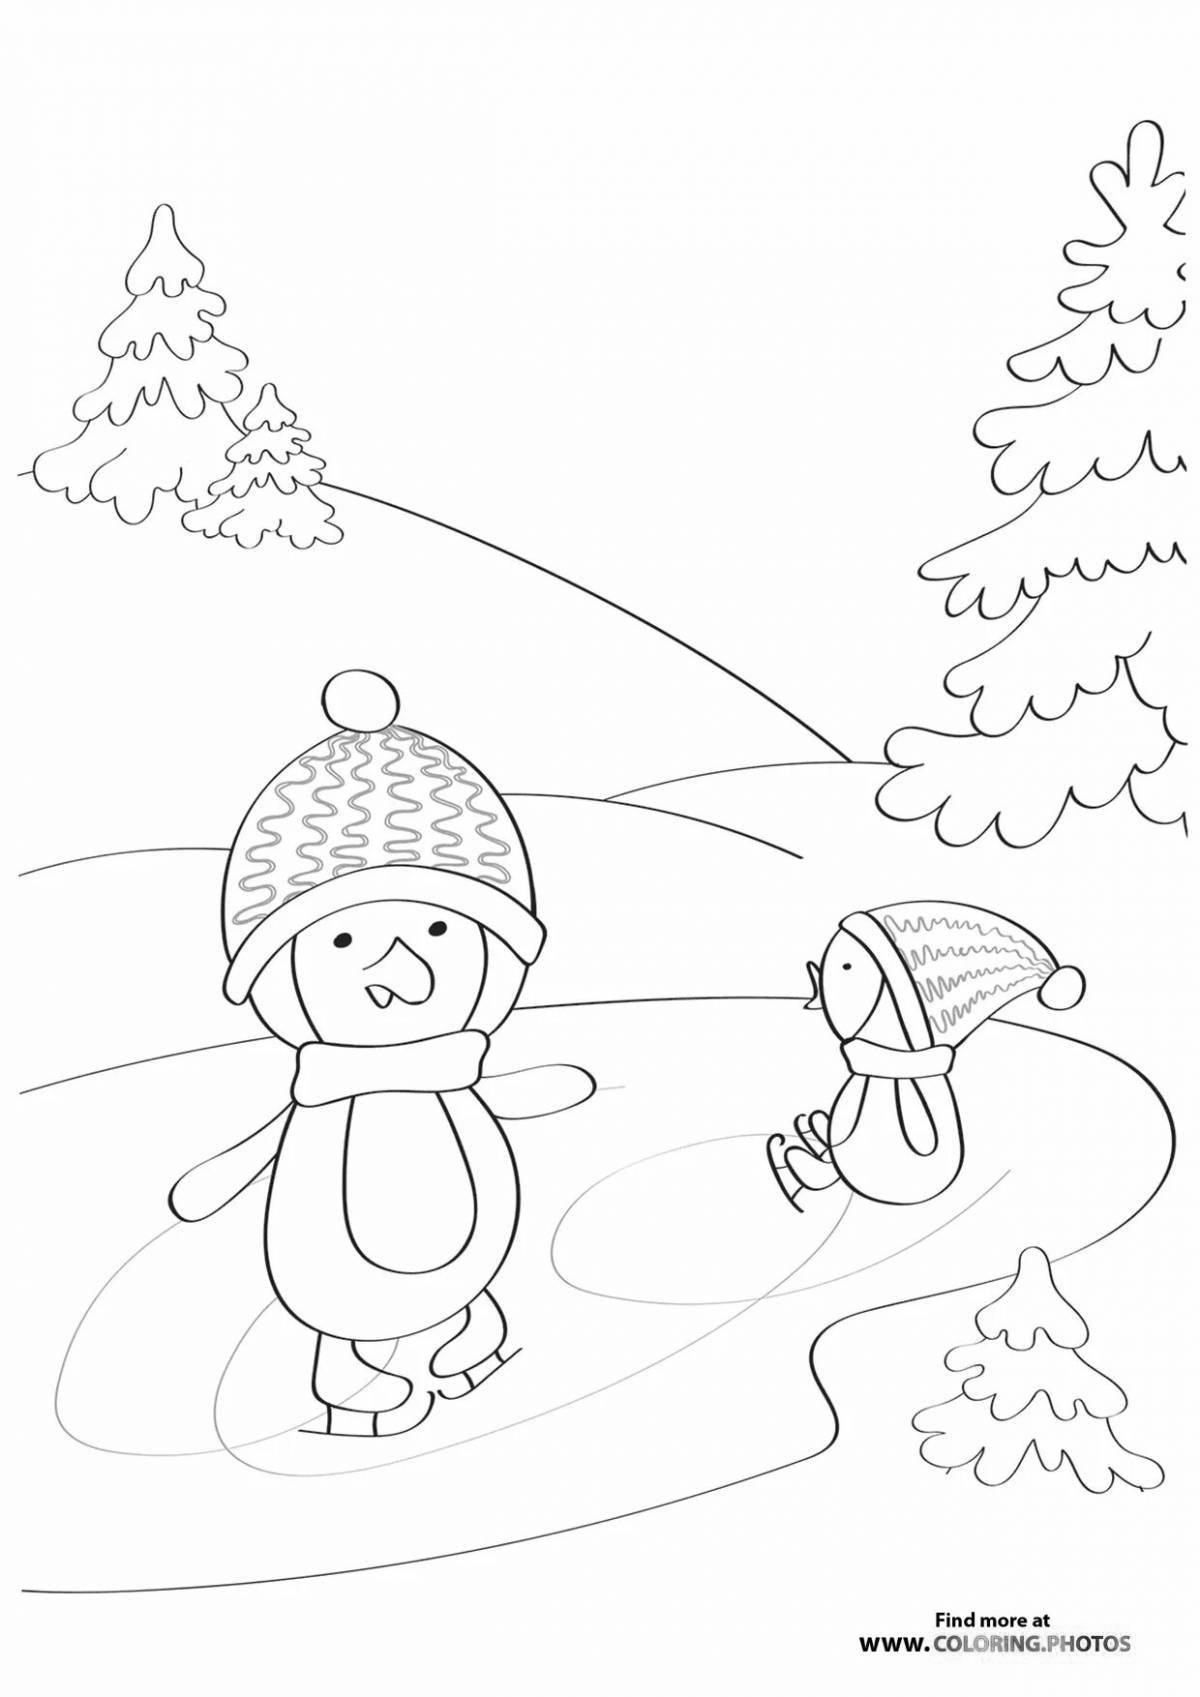 Creative ice safety coloring book for kids